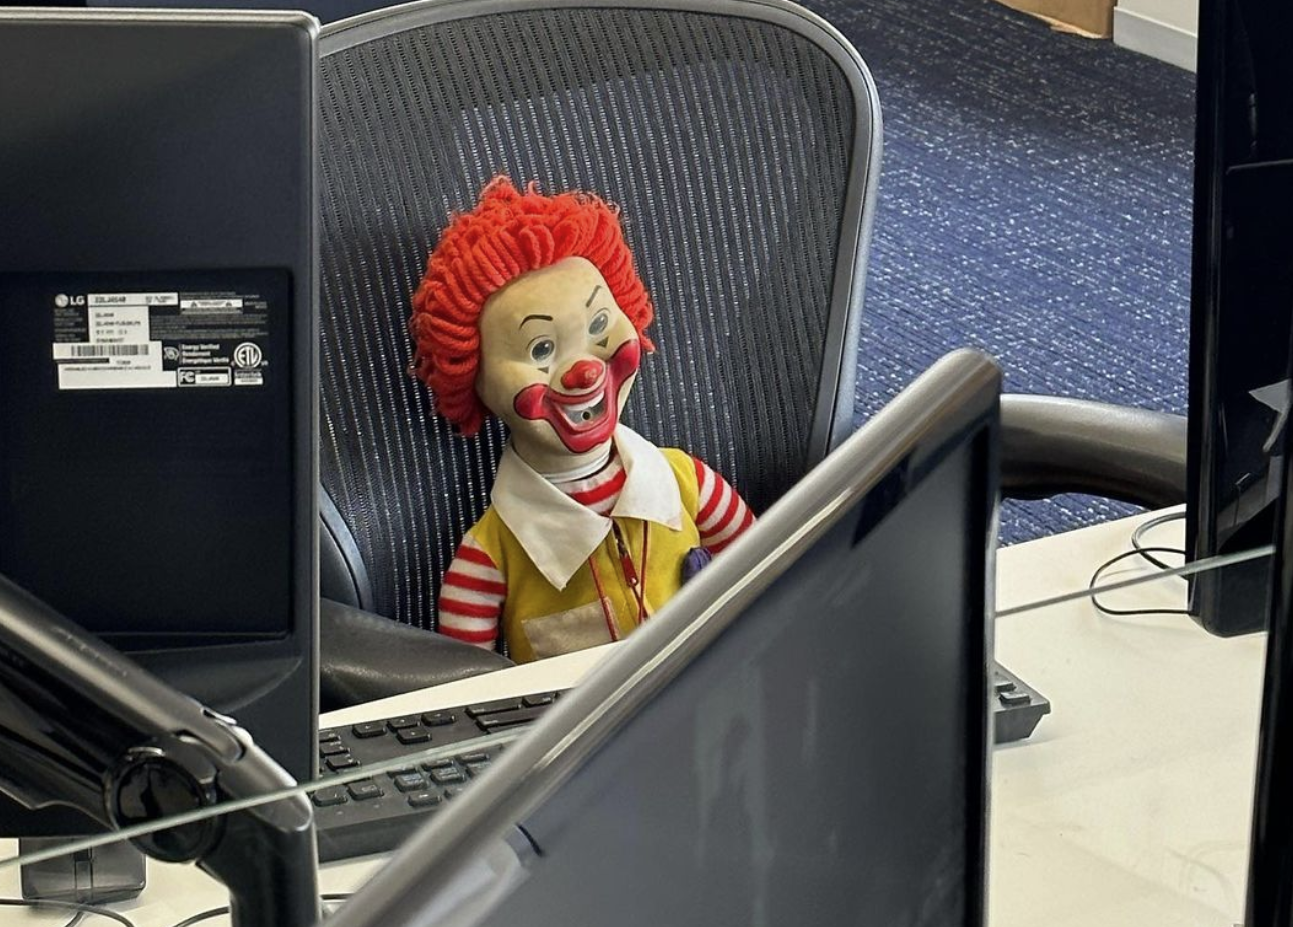 CNN’s Jake Tapper Is Terrorizing Coworkers With This Creepy Ronald McDonald Doll (mediaite.com)